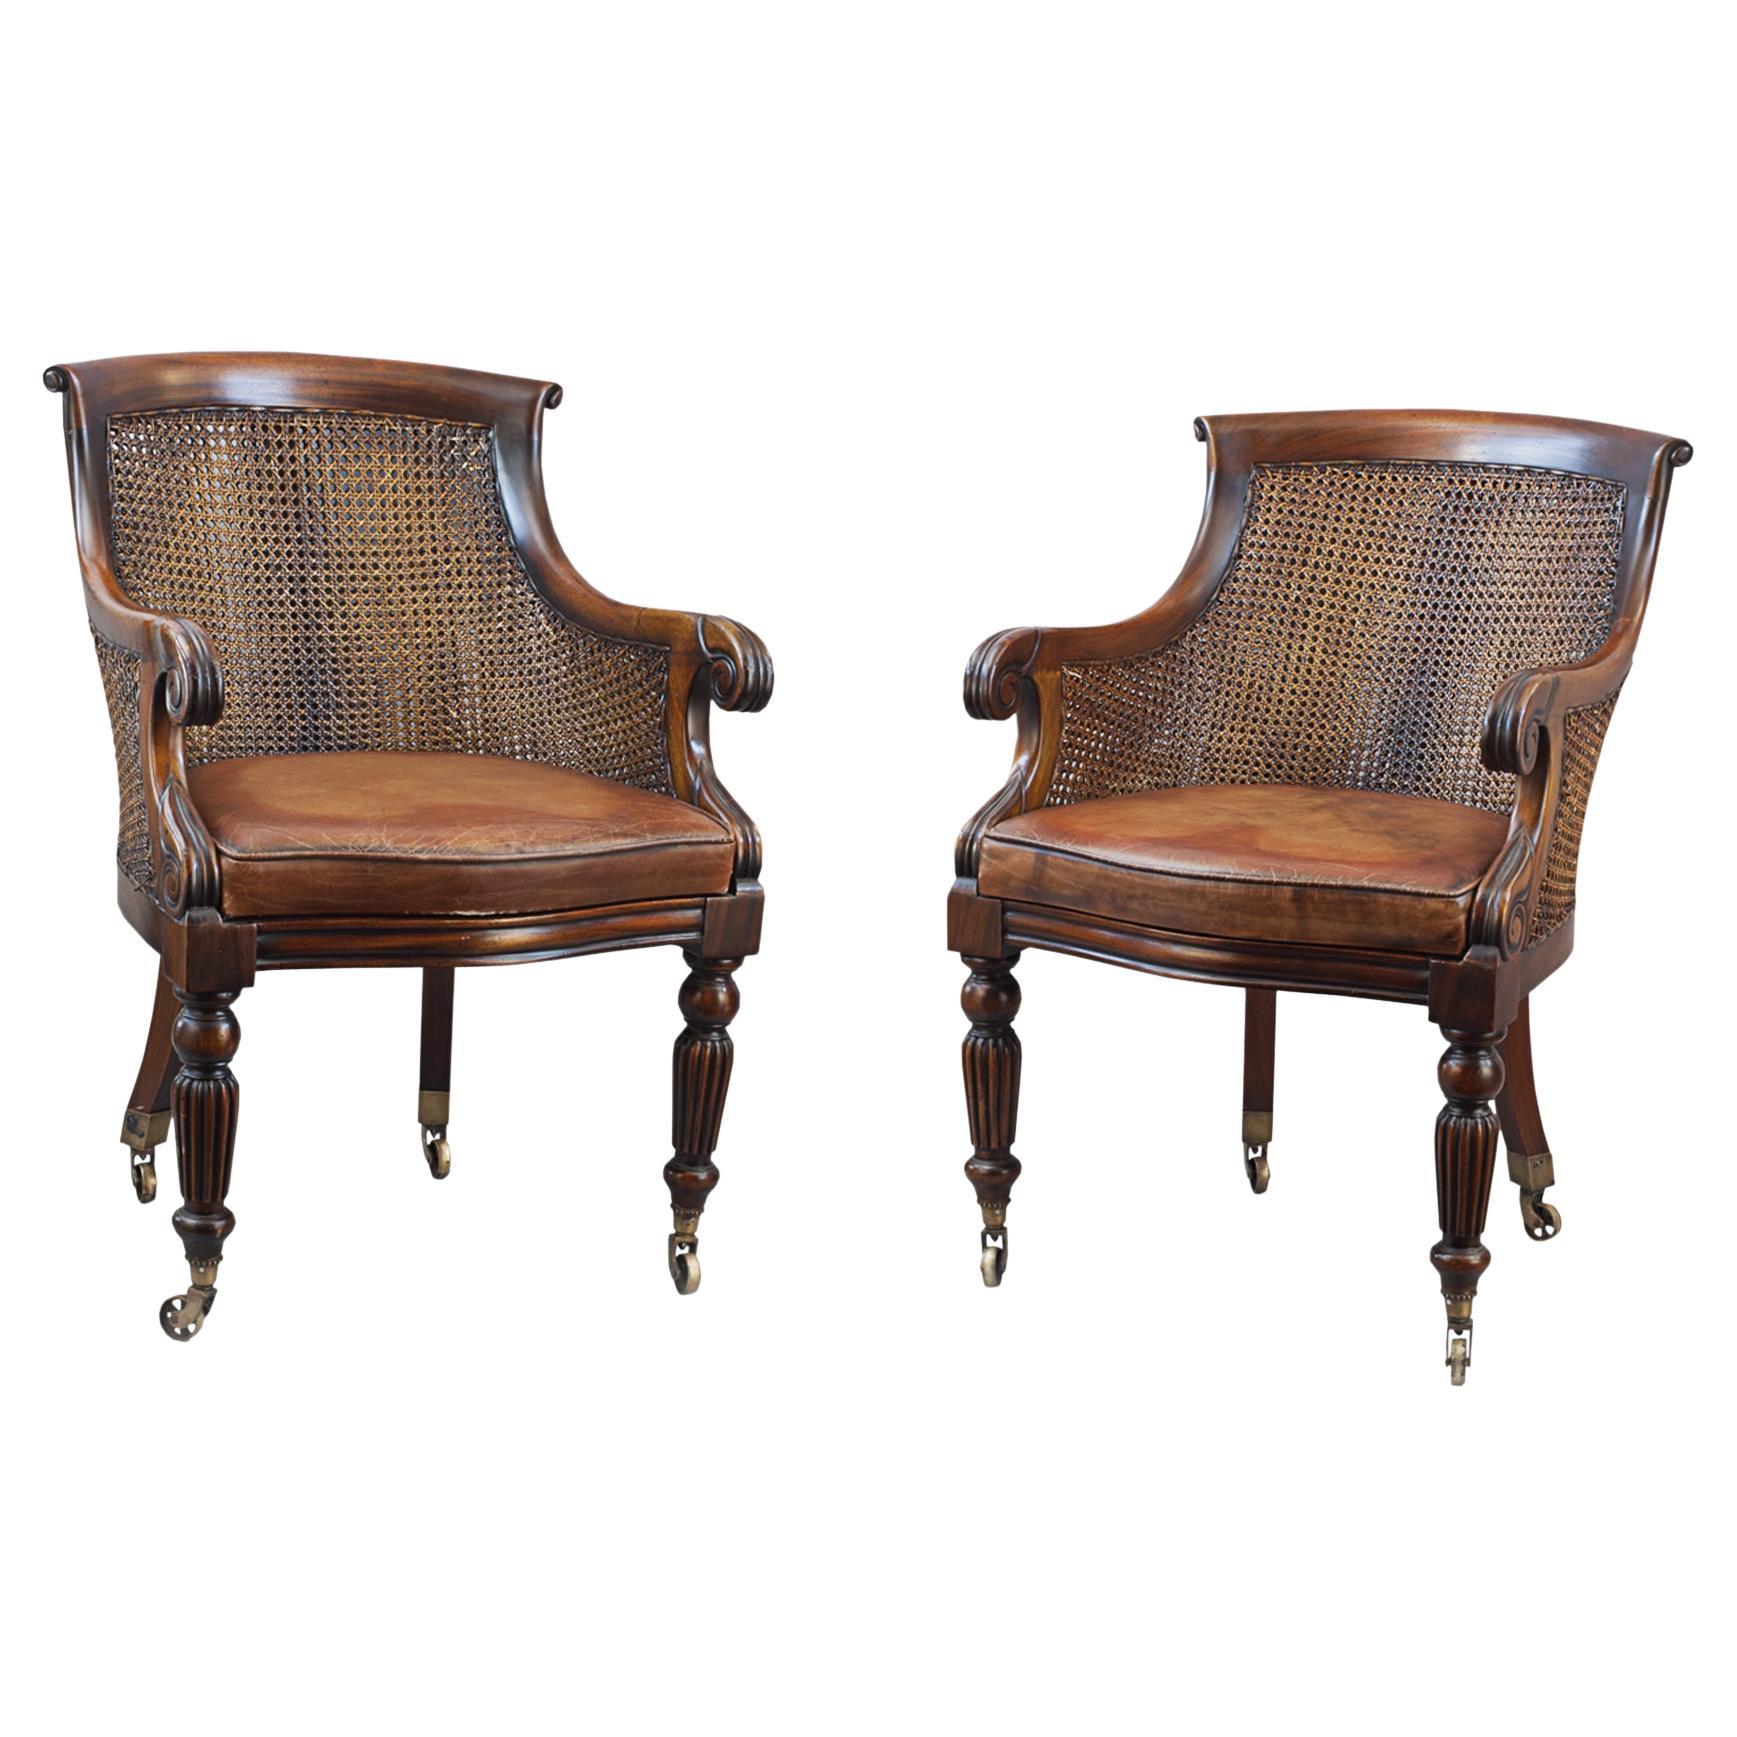 Pair of Regency Style Cane Bergeres Chairs